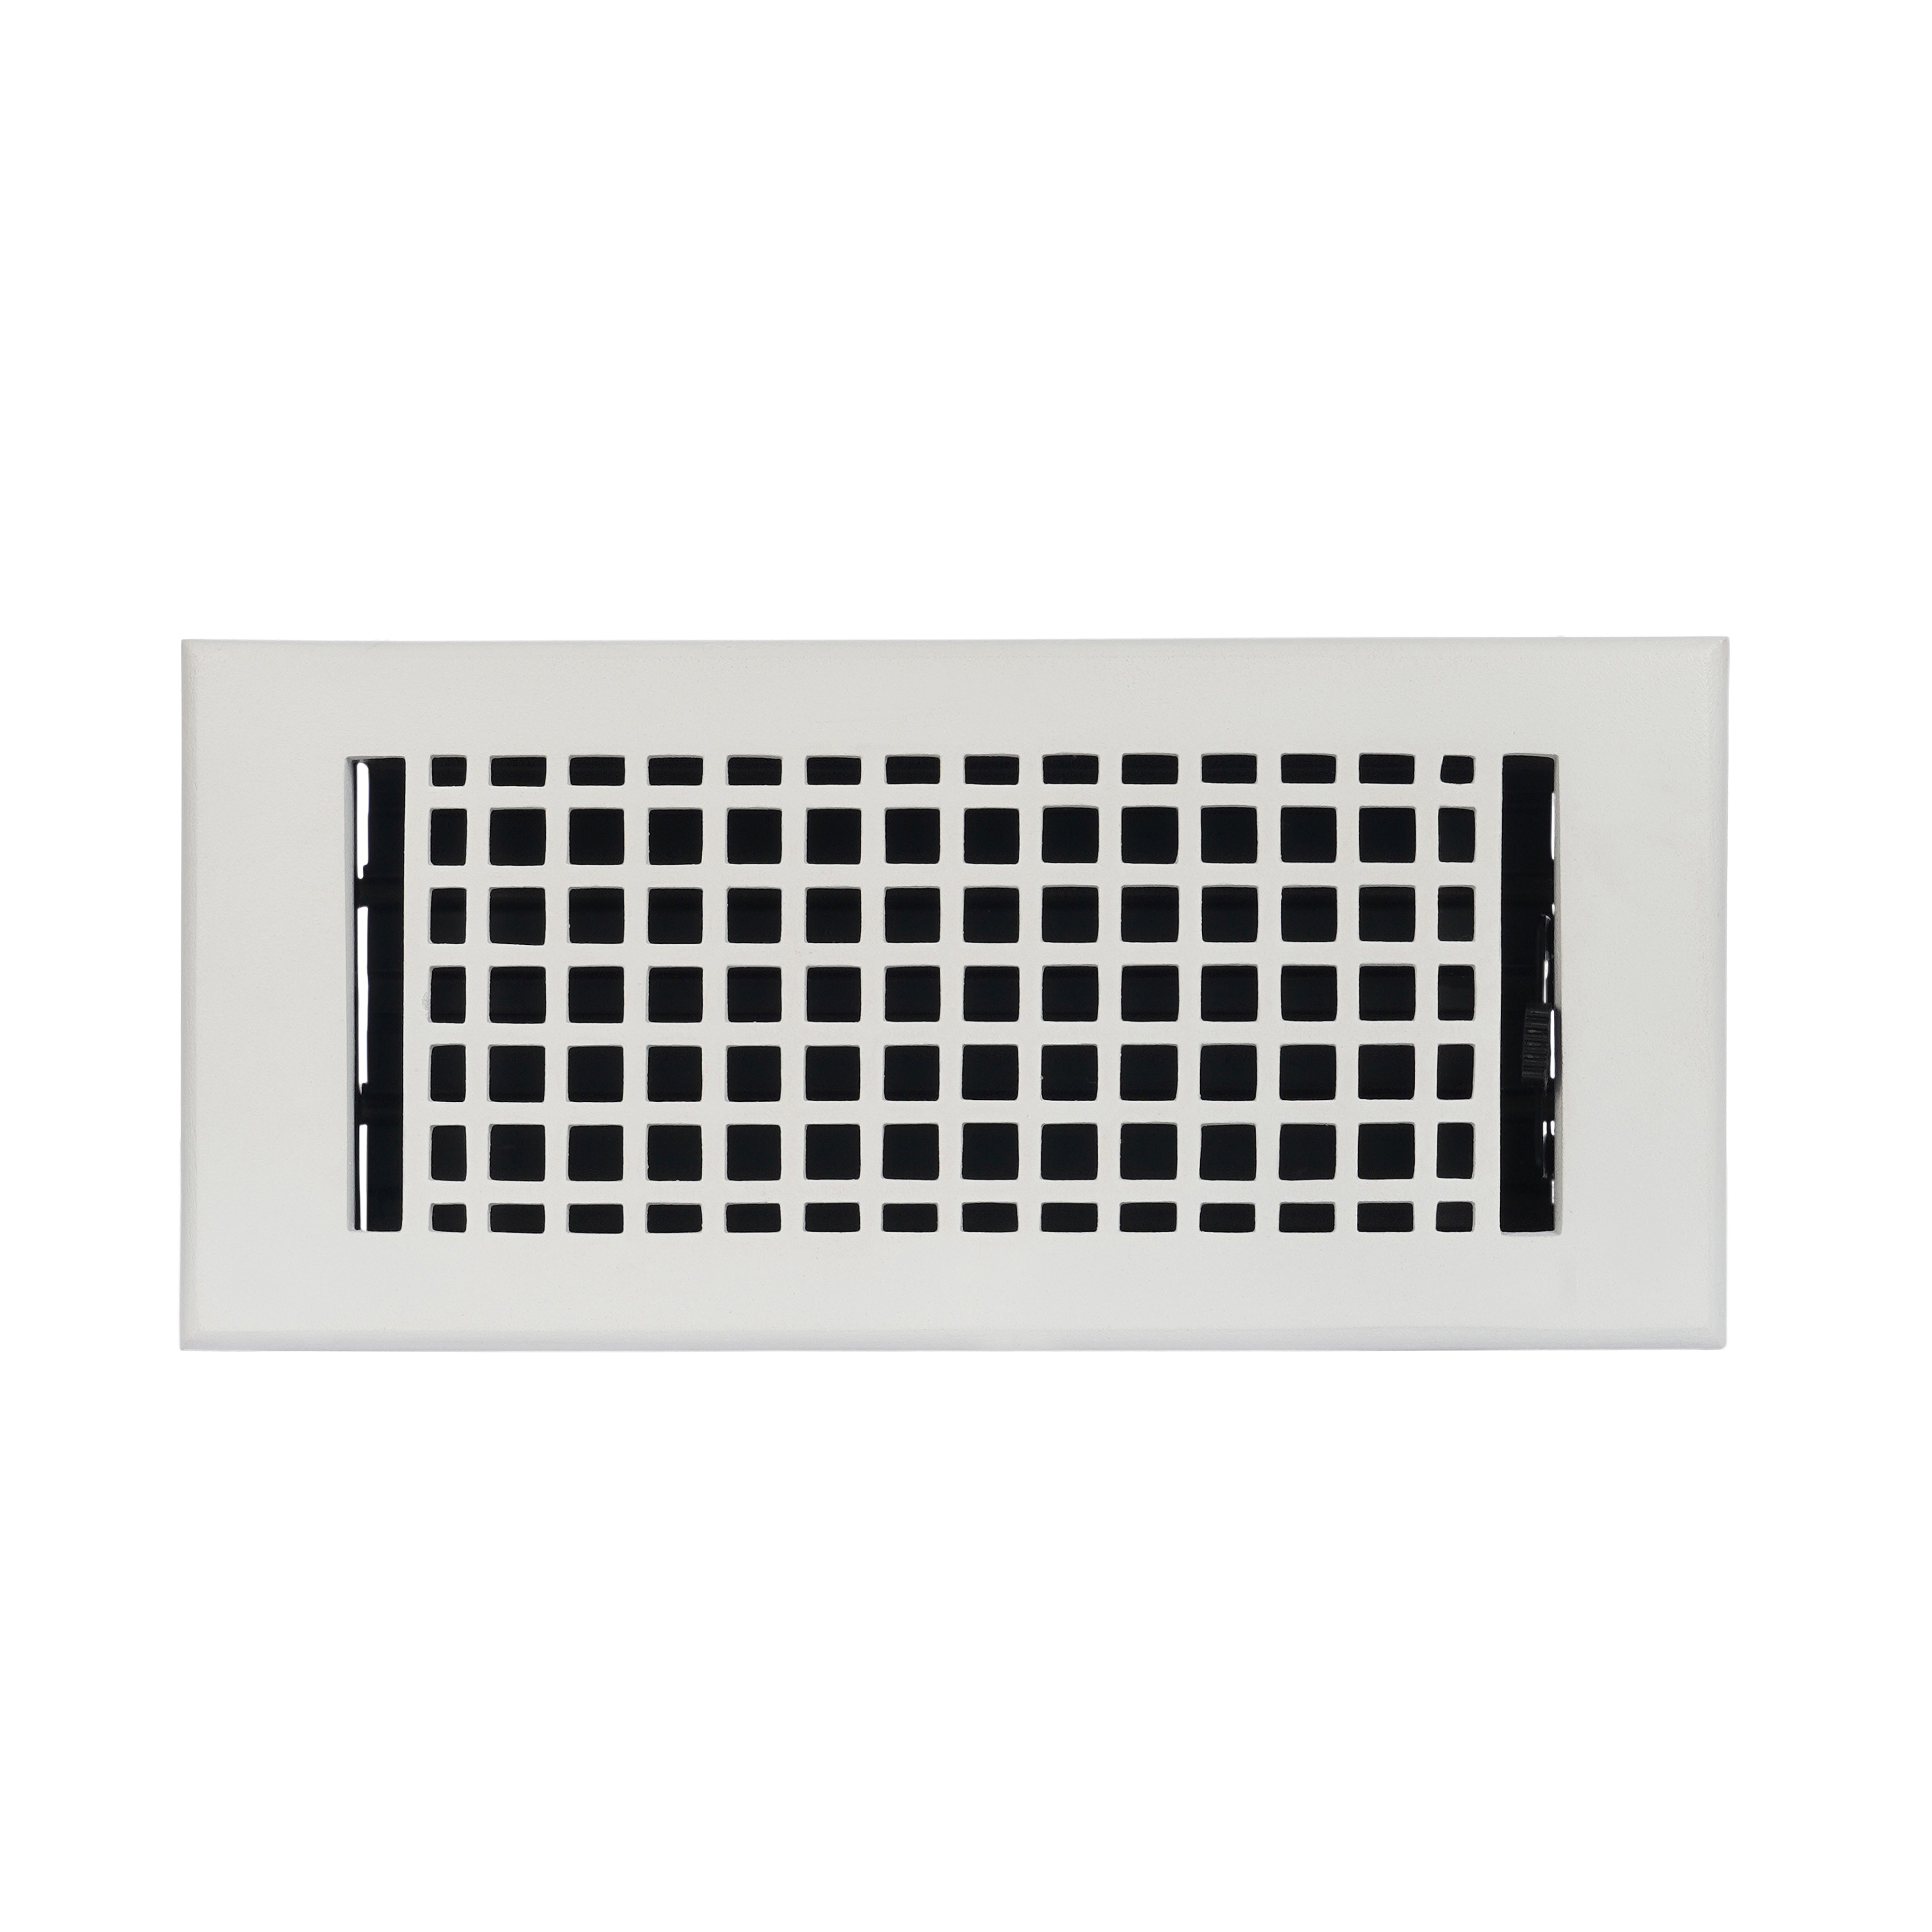 Mosaic Series Air Supply Vent 4"x10" Duct Opening (Overall 5-1/2"x 11-3/4") Heavy Gauge Solid Cast Walkable Register For Floor